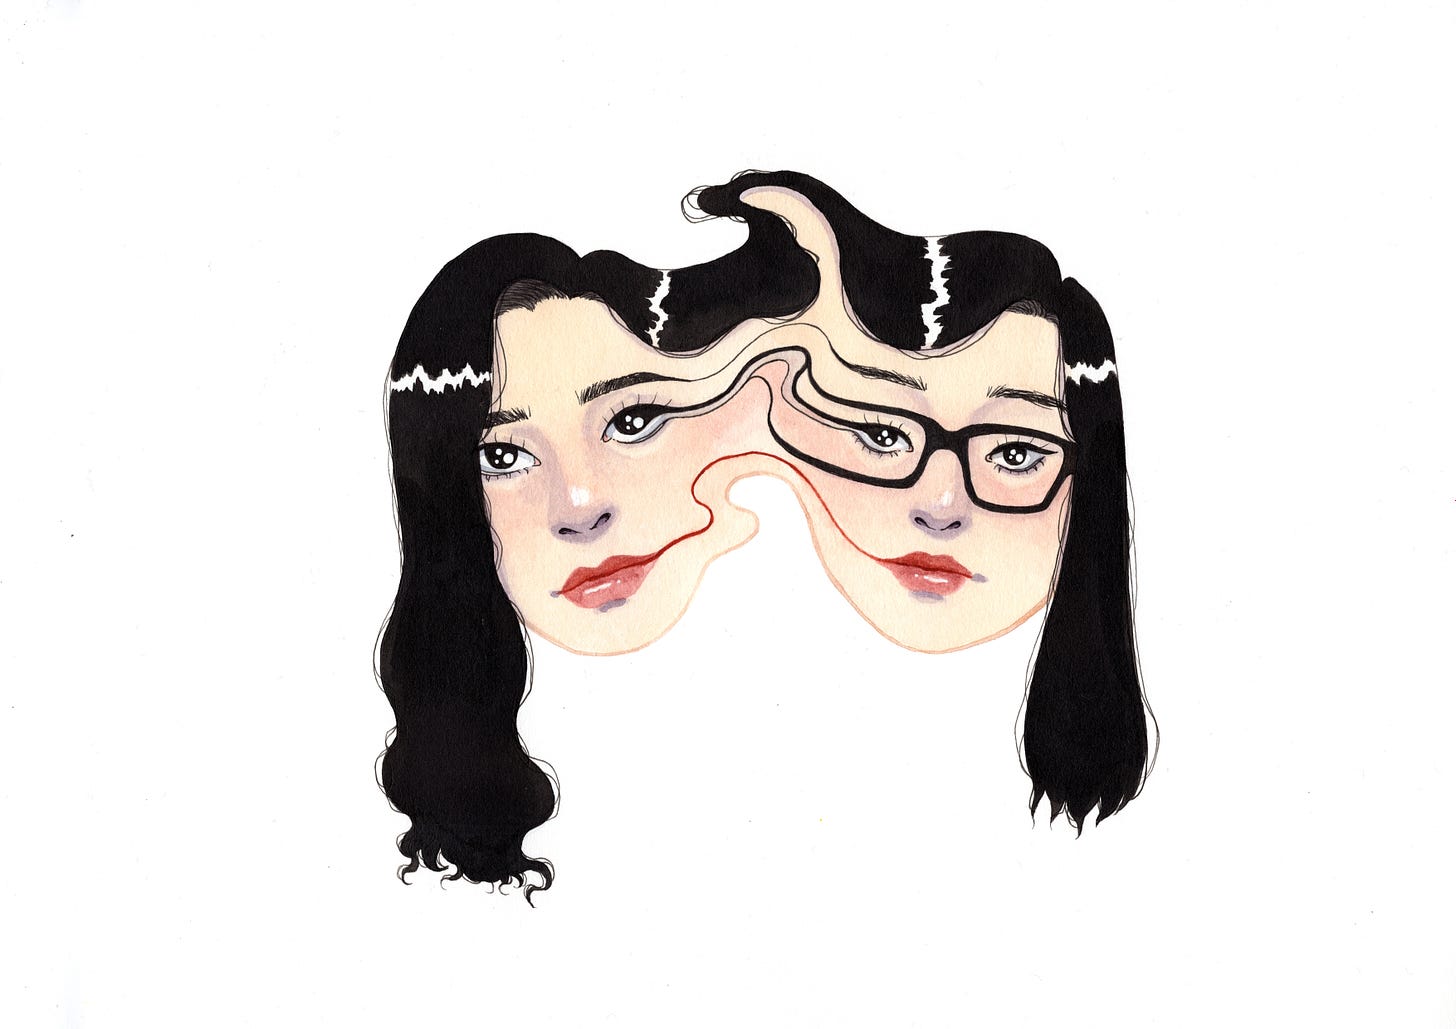 Illustration of Pelin and Jenny's head melting into each other.